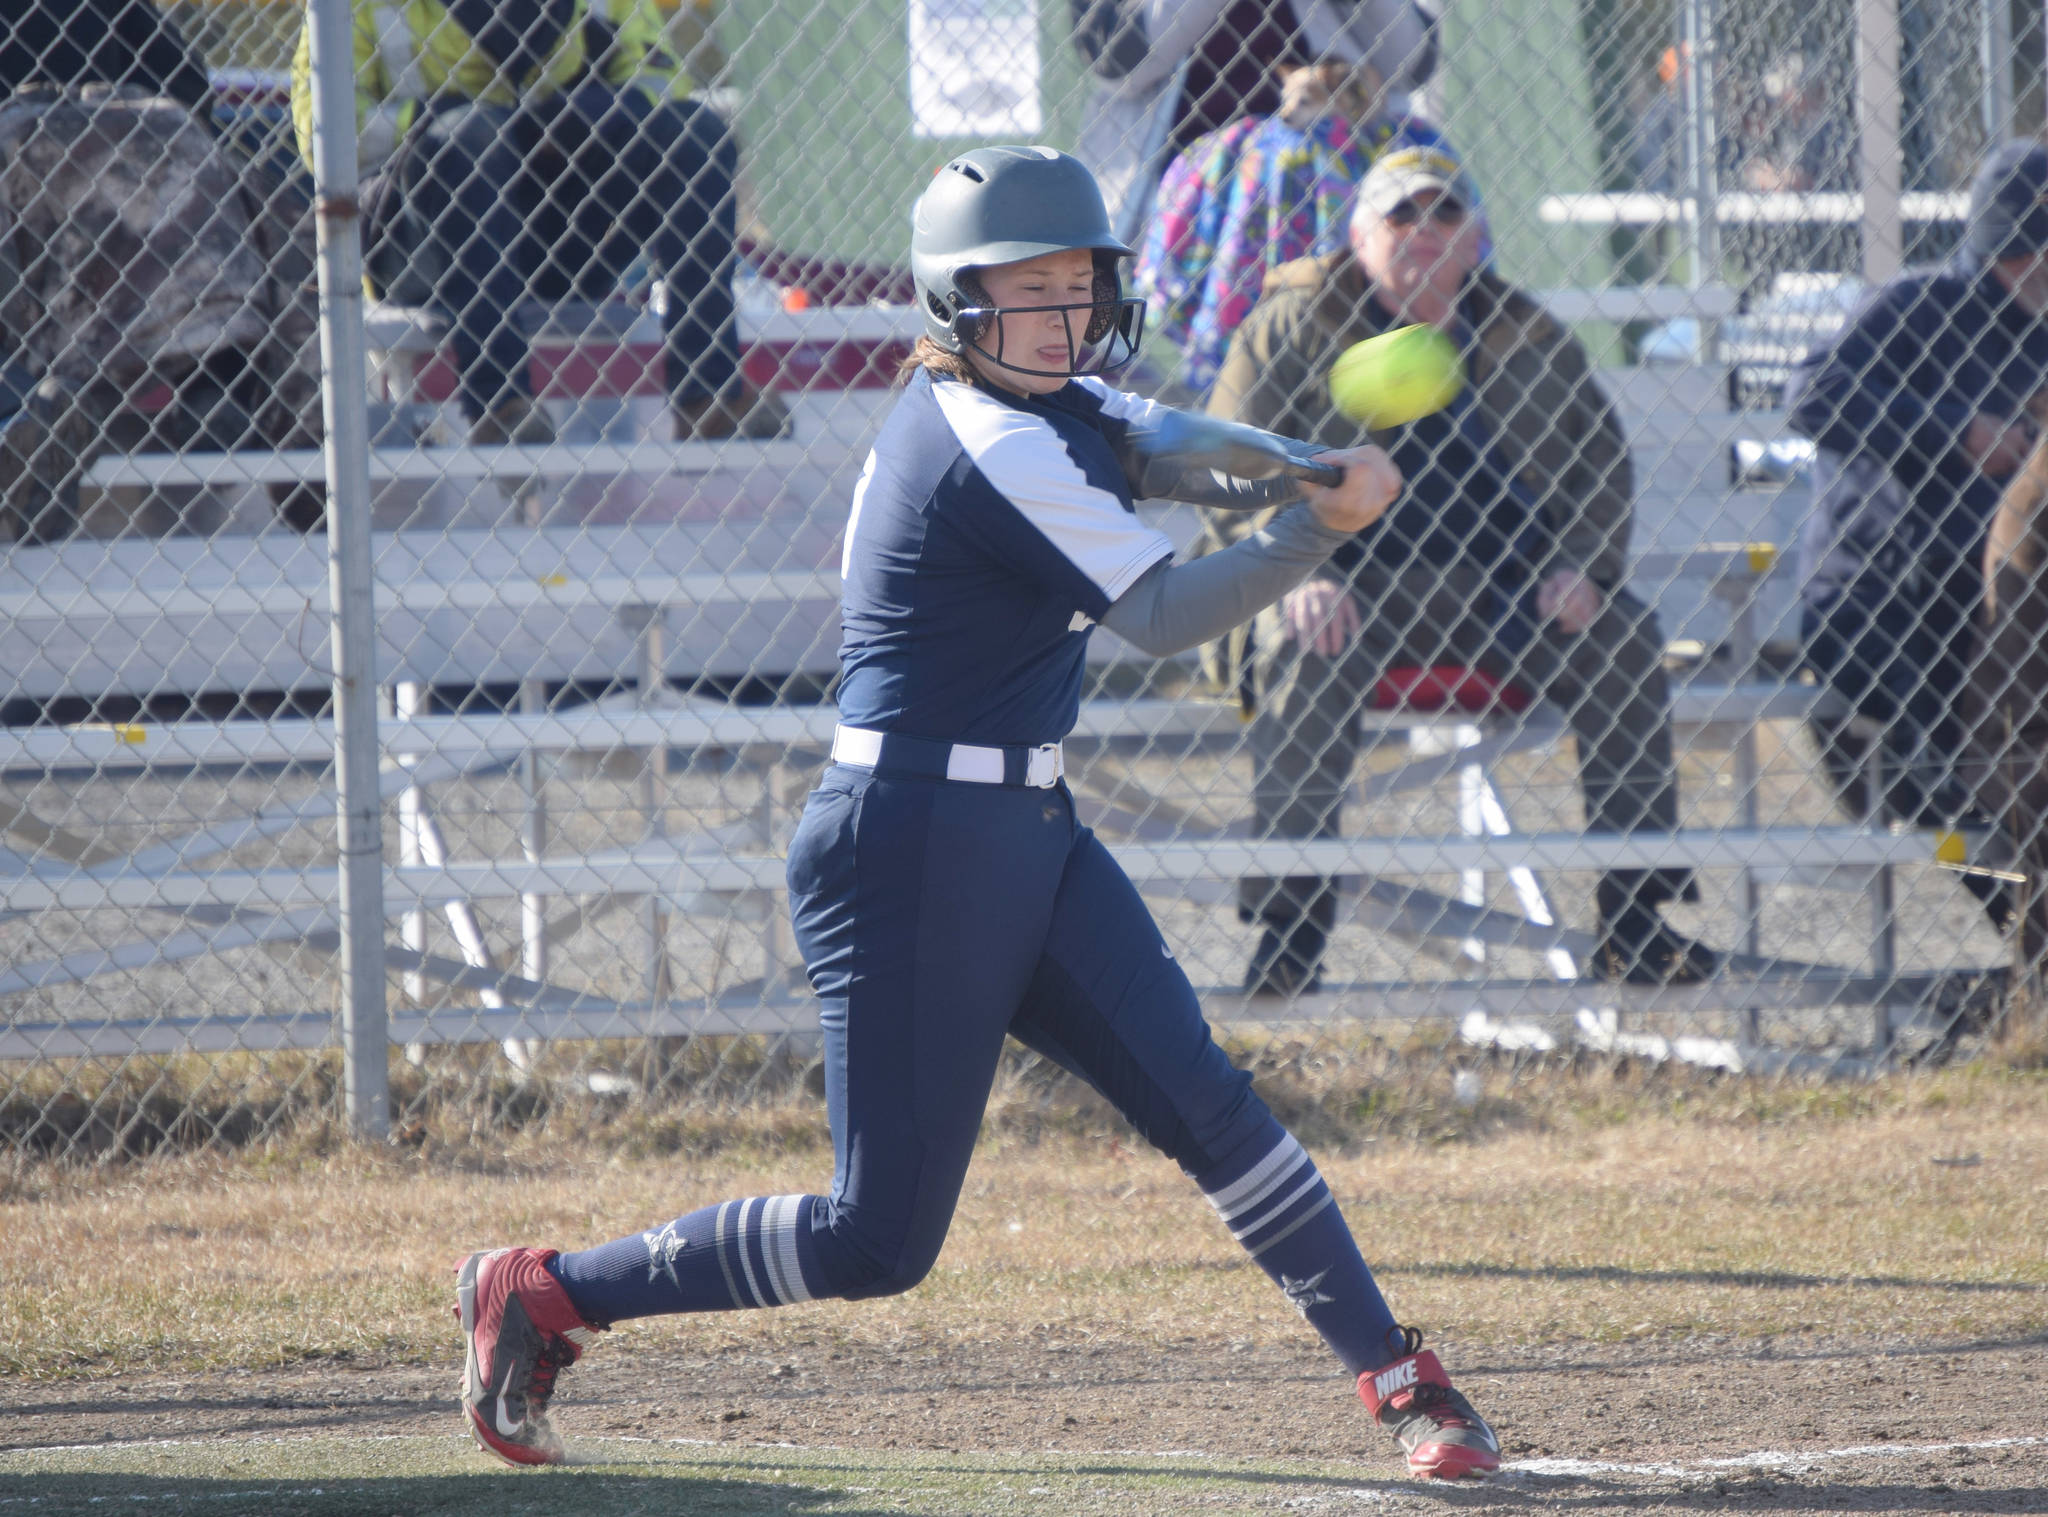 Soldotna’s Brook Fischer collects a hit against Kenai Central on Thursday, May 13, 2021, in Kenai, Alaska. (Photo by Jeff Helminiak/Peninsula Clarion)